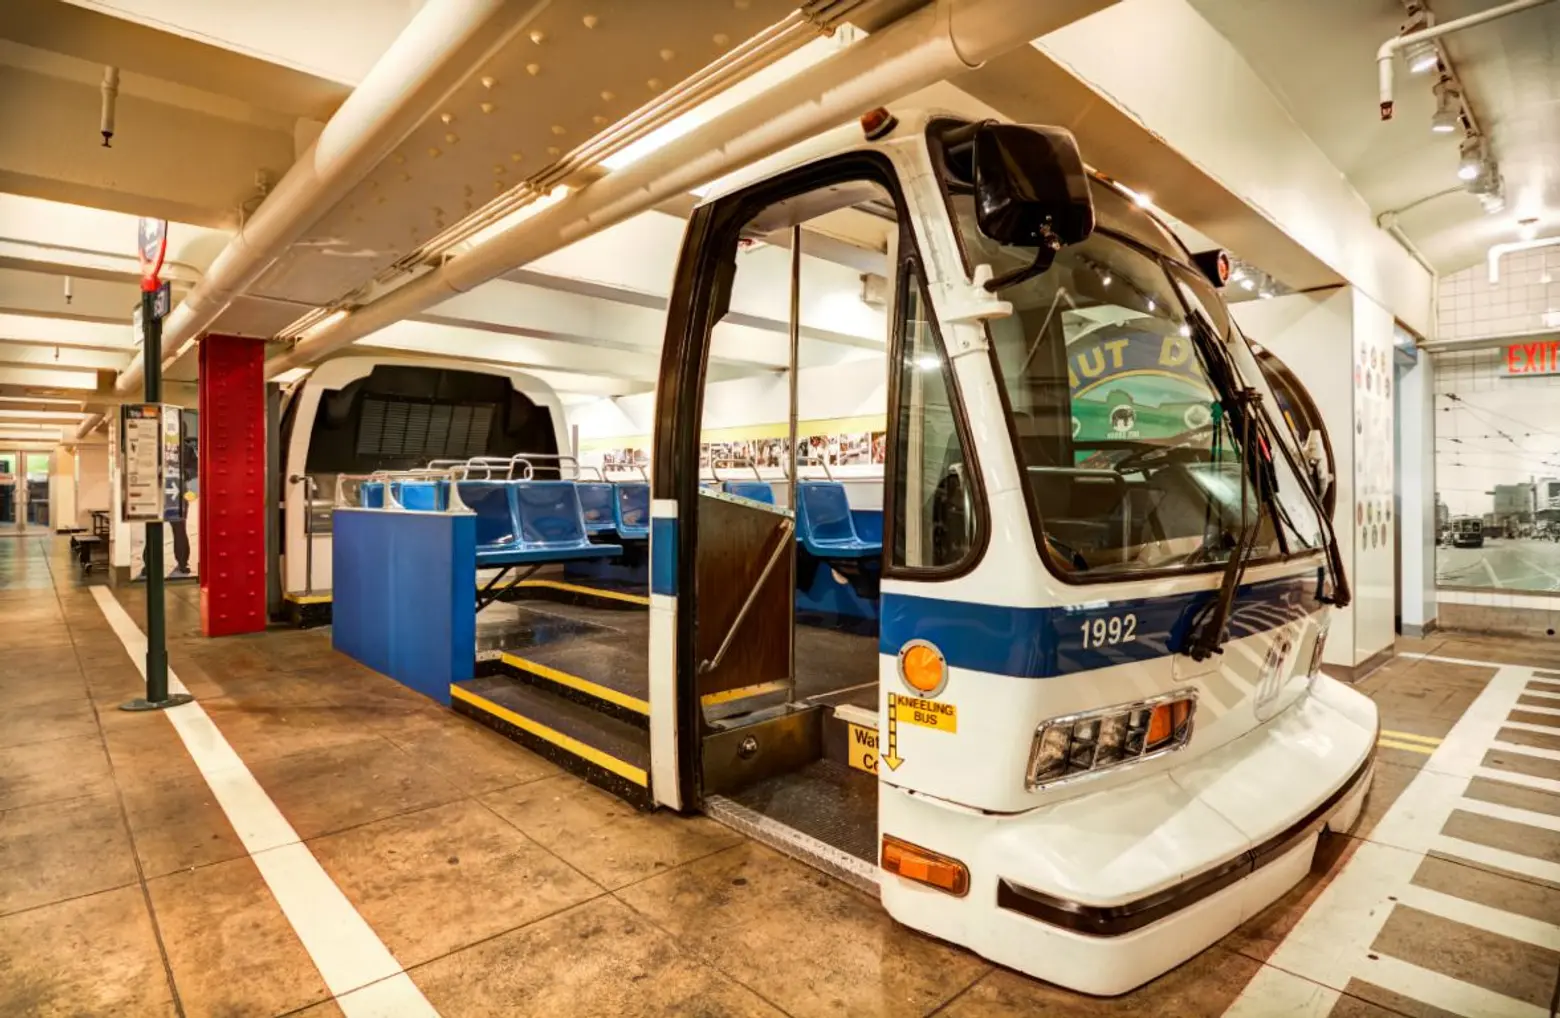 New York Transit Museum, vintage NYC buses, transportation history, Brooklyn museums